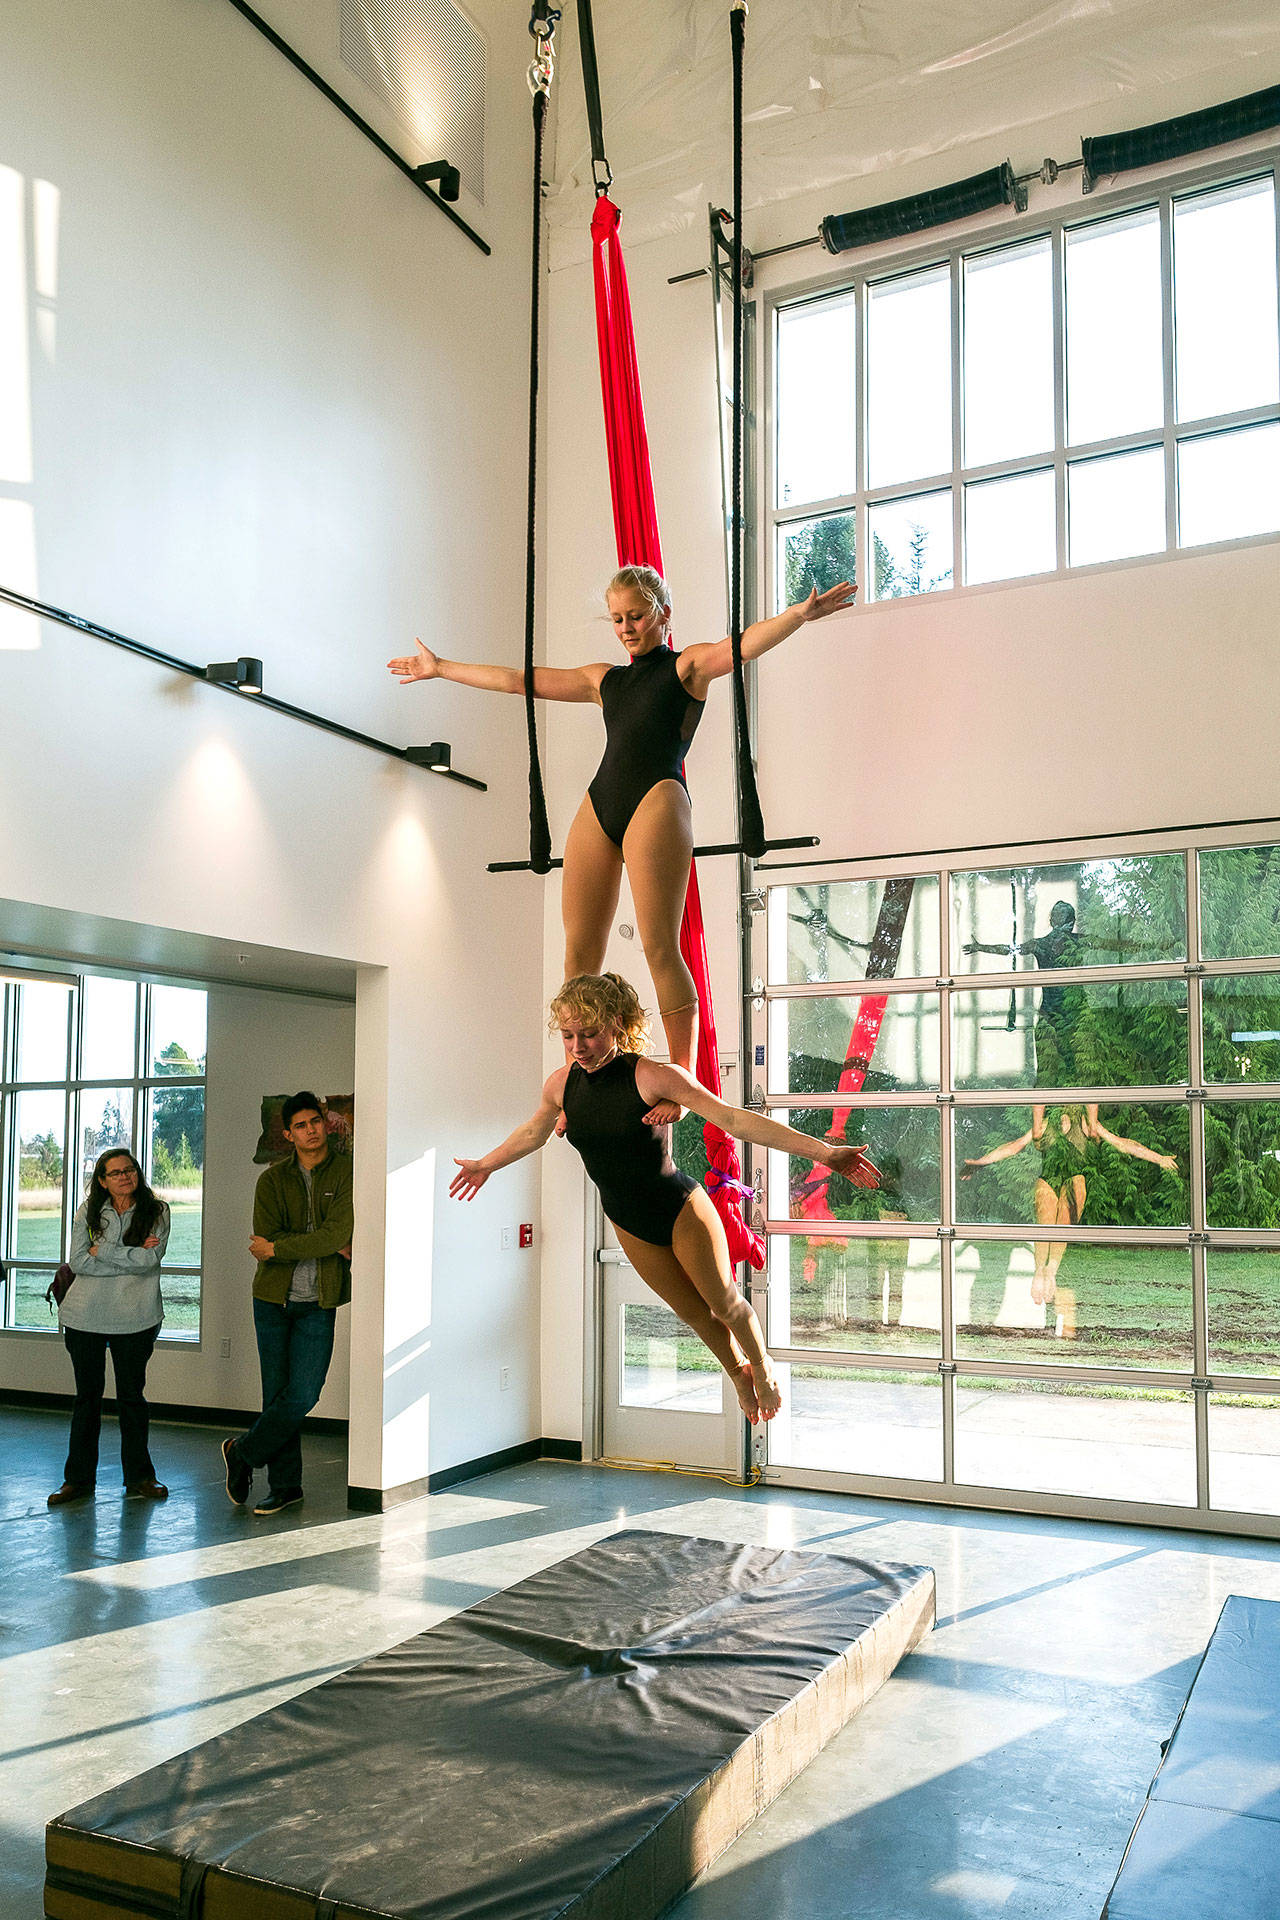 Students from UMO School of Physical Arts peform at Open Space grand re-opening celebration on Saturday. (Kent Phelan photo)